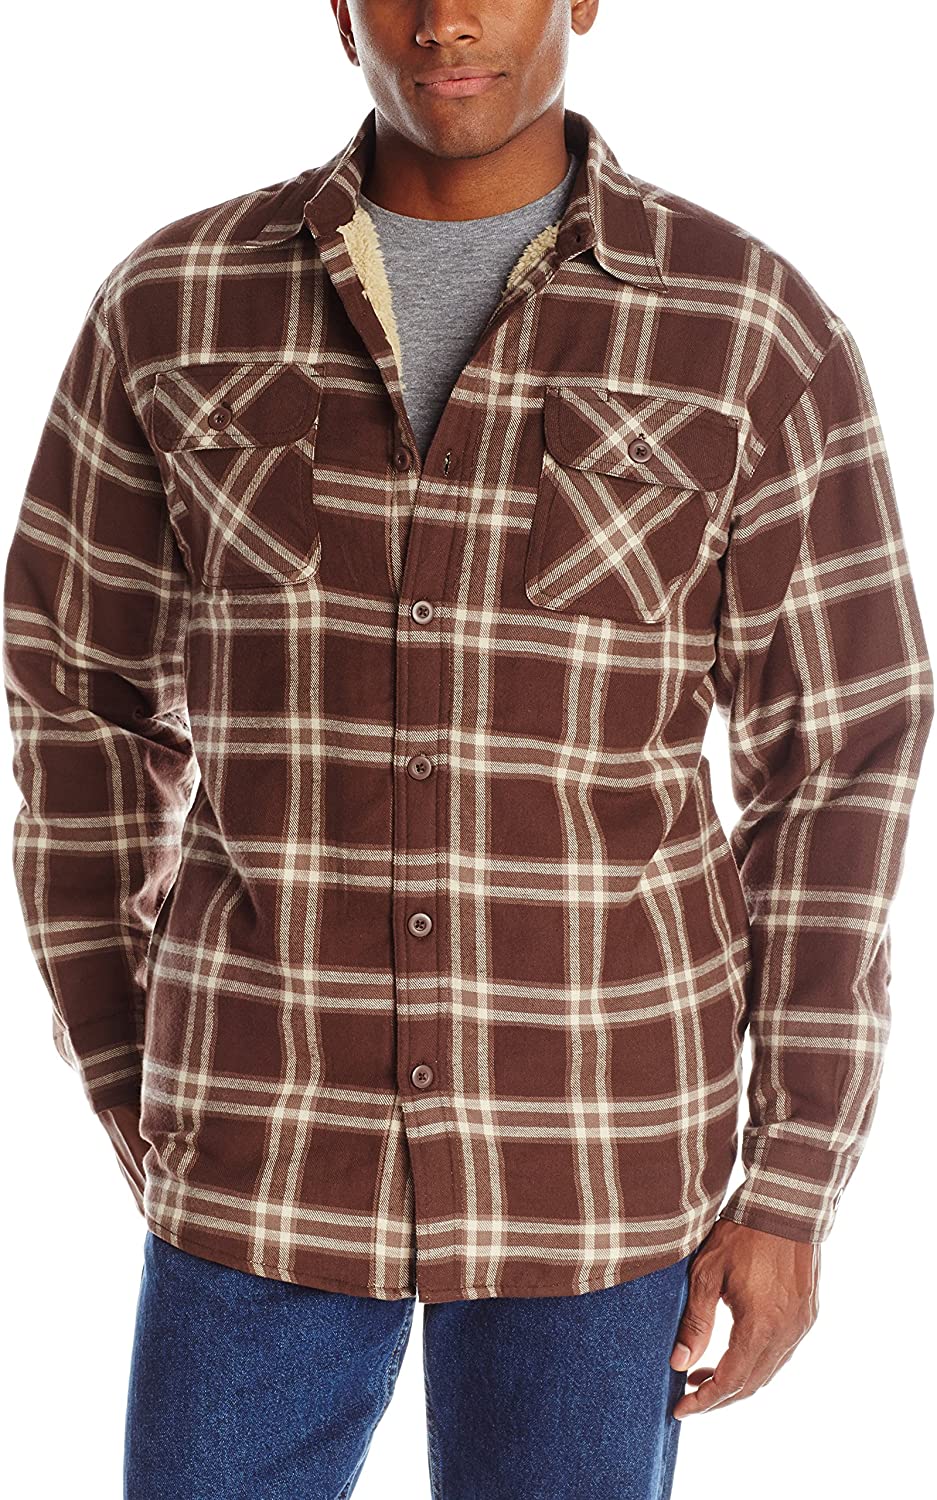 Review of Authentics Men's Long Sleeve Sherpa Lined Shirt Jacket